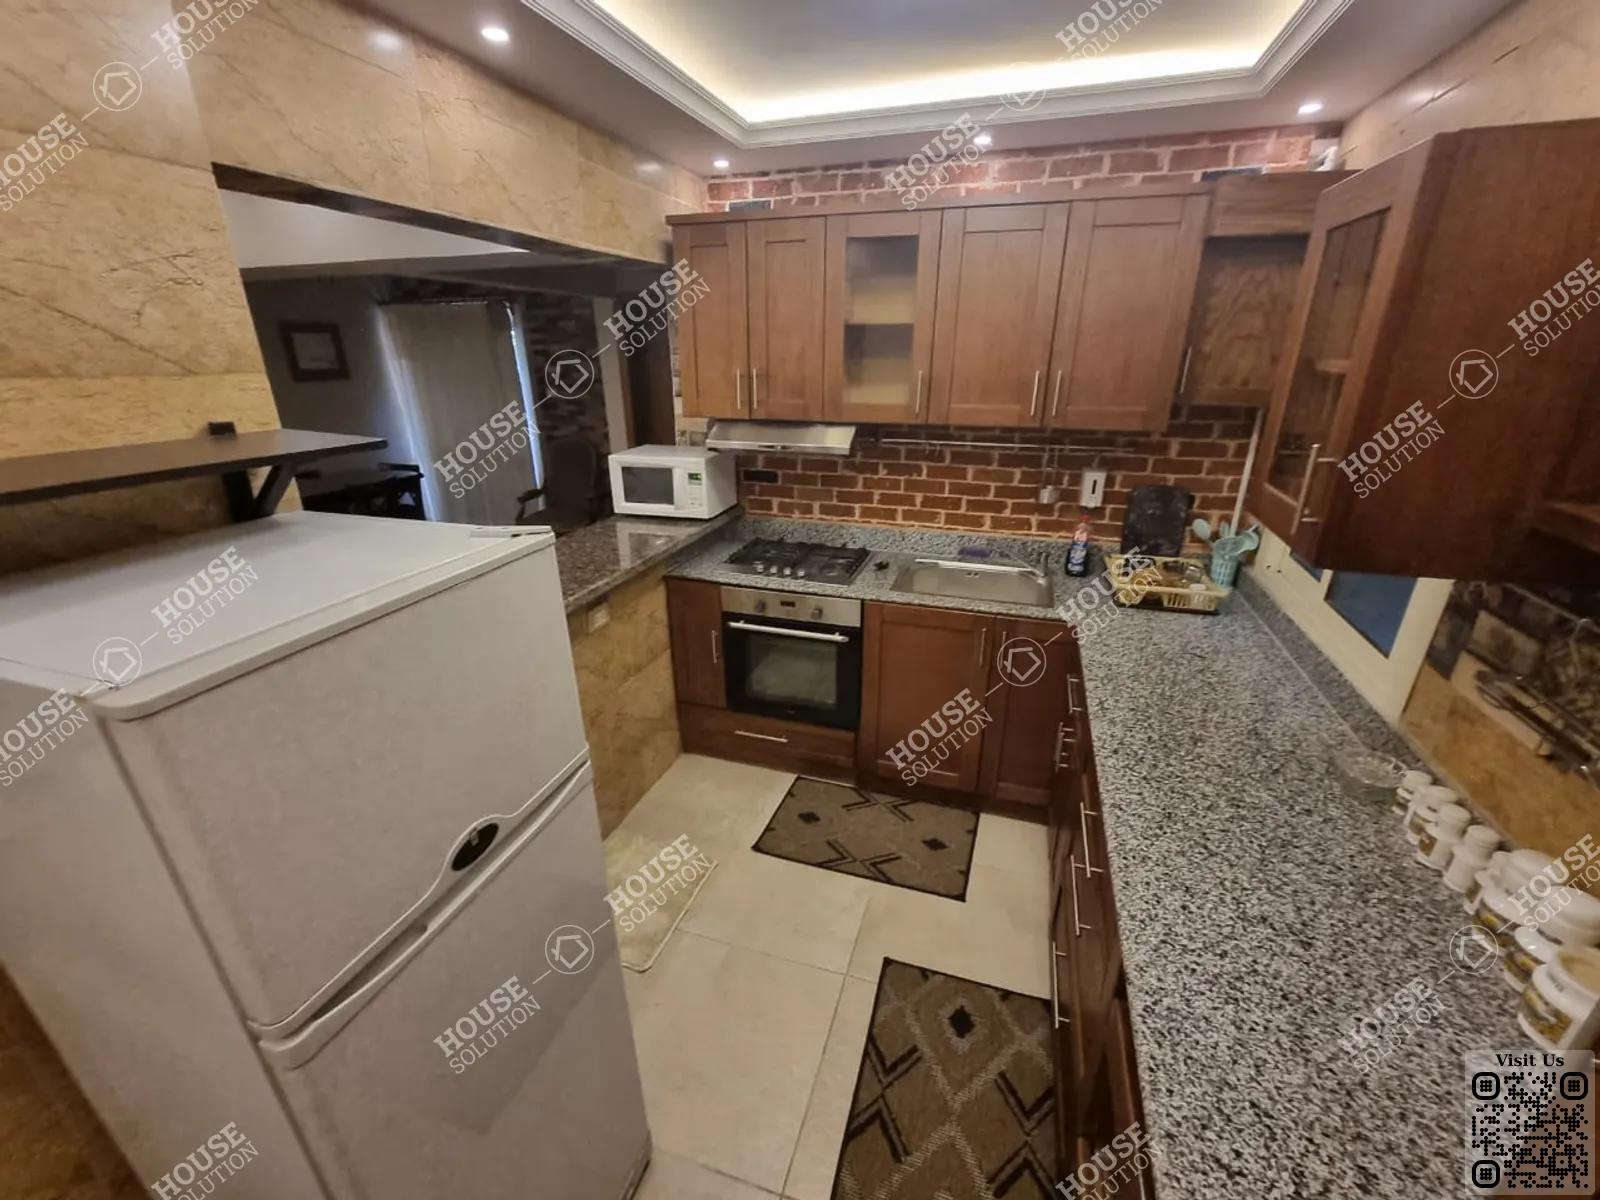 KITCHEN  @ Apartments For Rent In Maadi Maadi Degla Area: 110 m² consists of 2 Bedrooms 2 Bathrooms Modern furnished 5 stars #5576-1